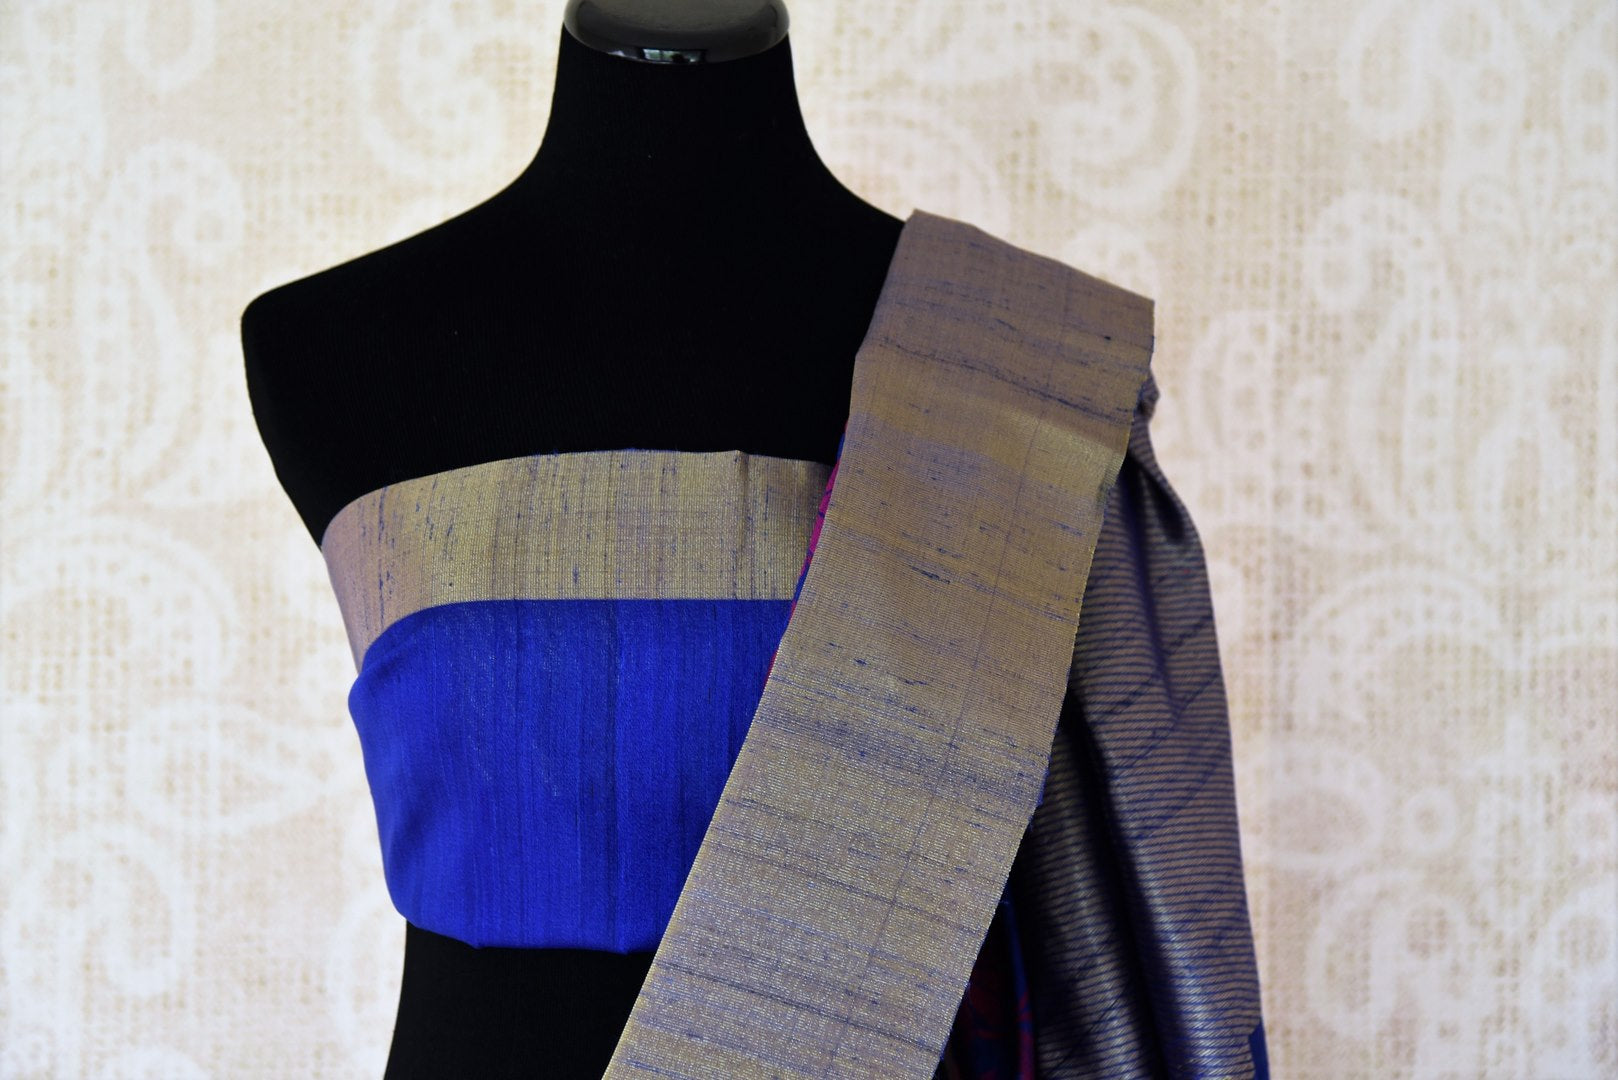 Buy blue floral tussar Banarasi sari with zari border online in USA. Adorn yourself in glorious Indian sarees from Pure Elegance Indian fashion store in USA. We have an exclusive range of Indian designer sarees, traditional handloom saris, Banarasi sarees to make your Indian look absolutely captivating.-blouse pallu